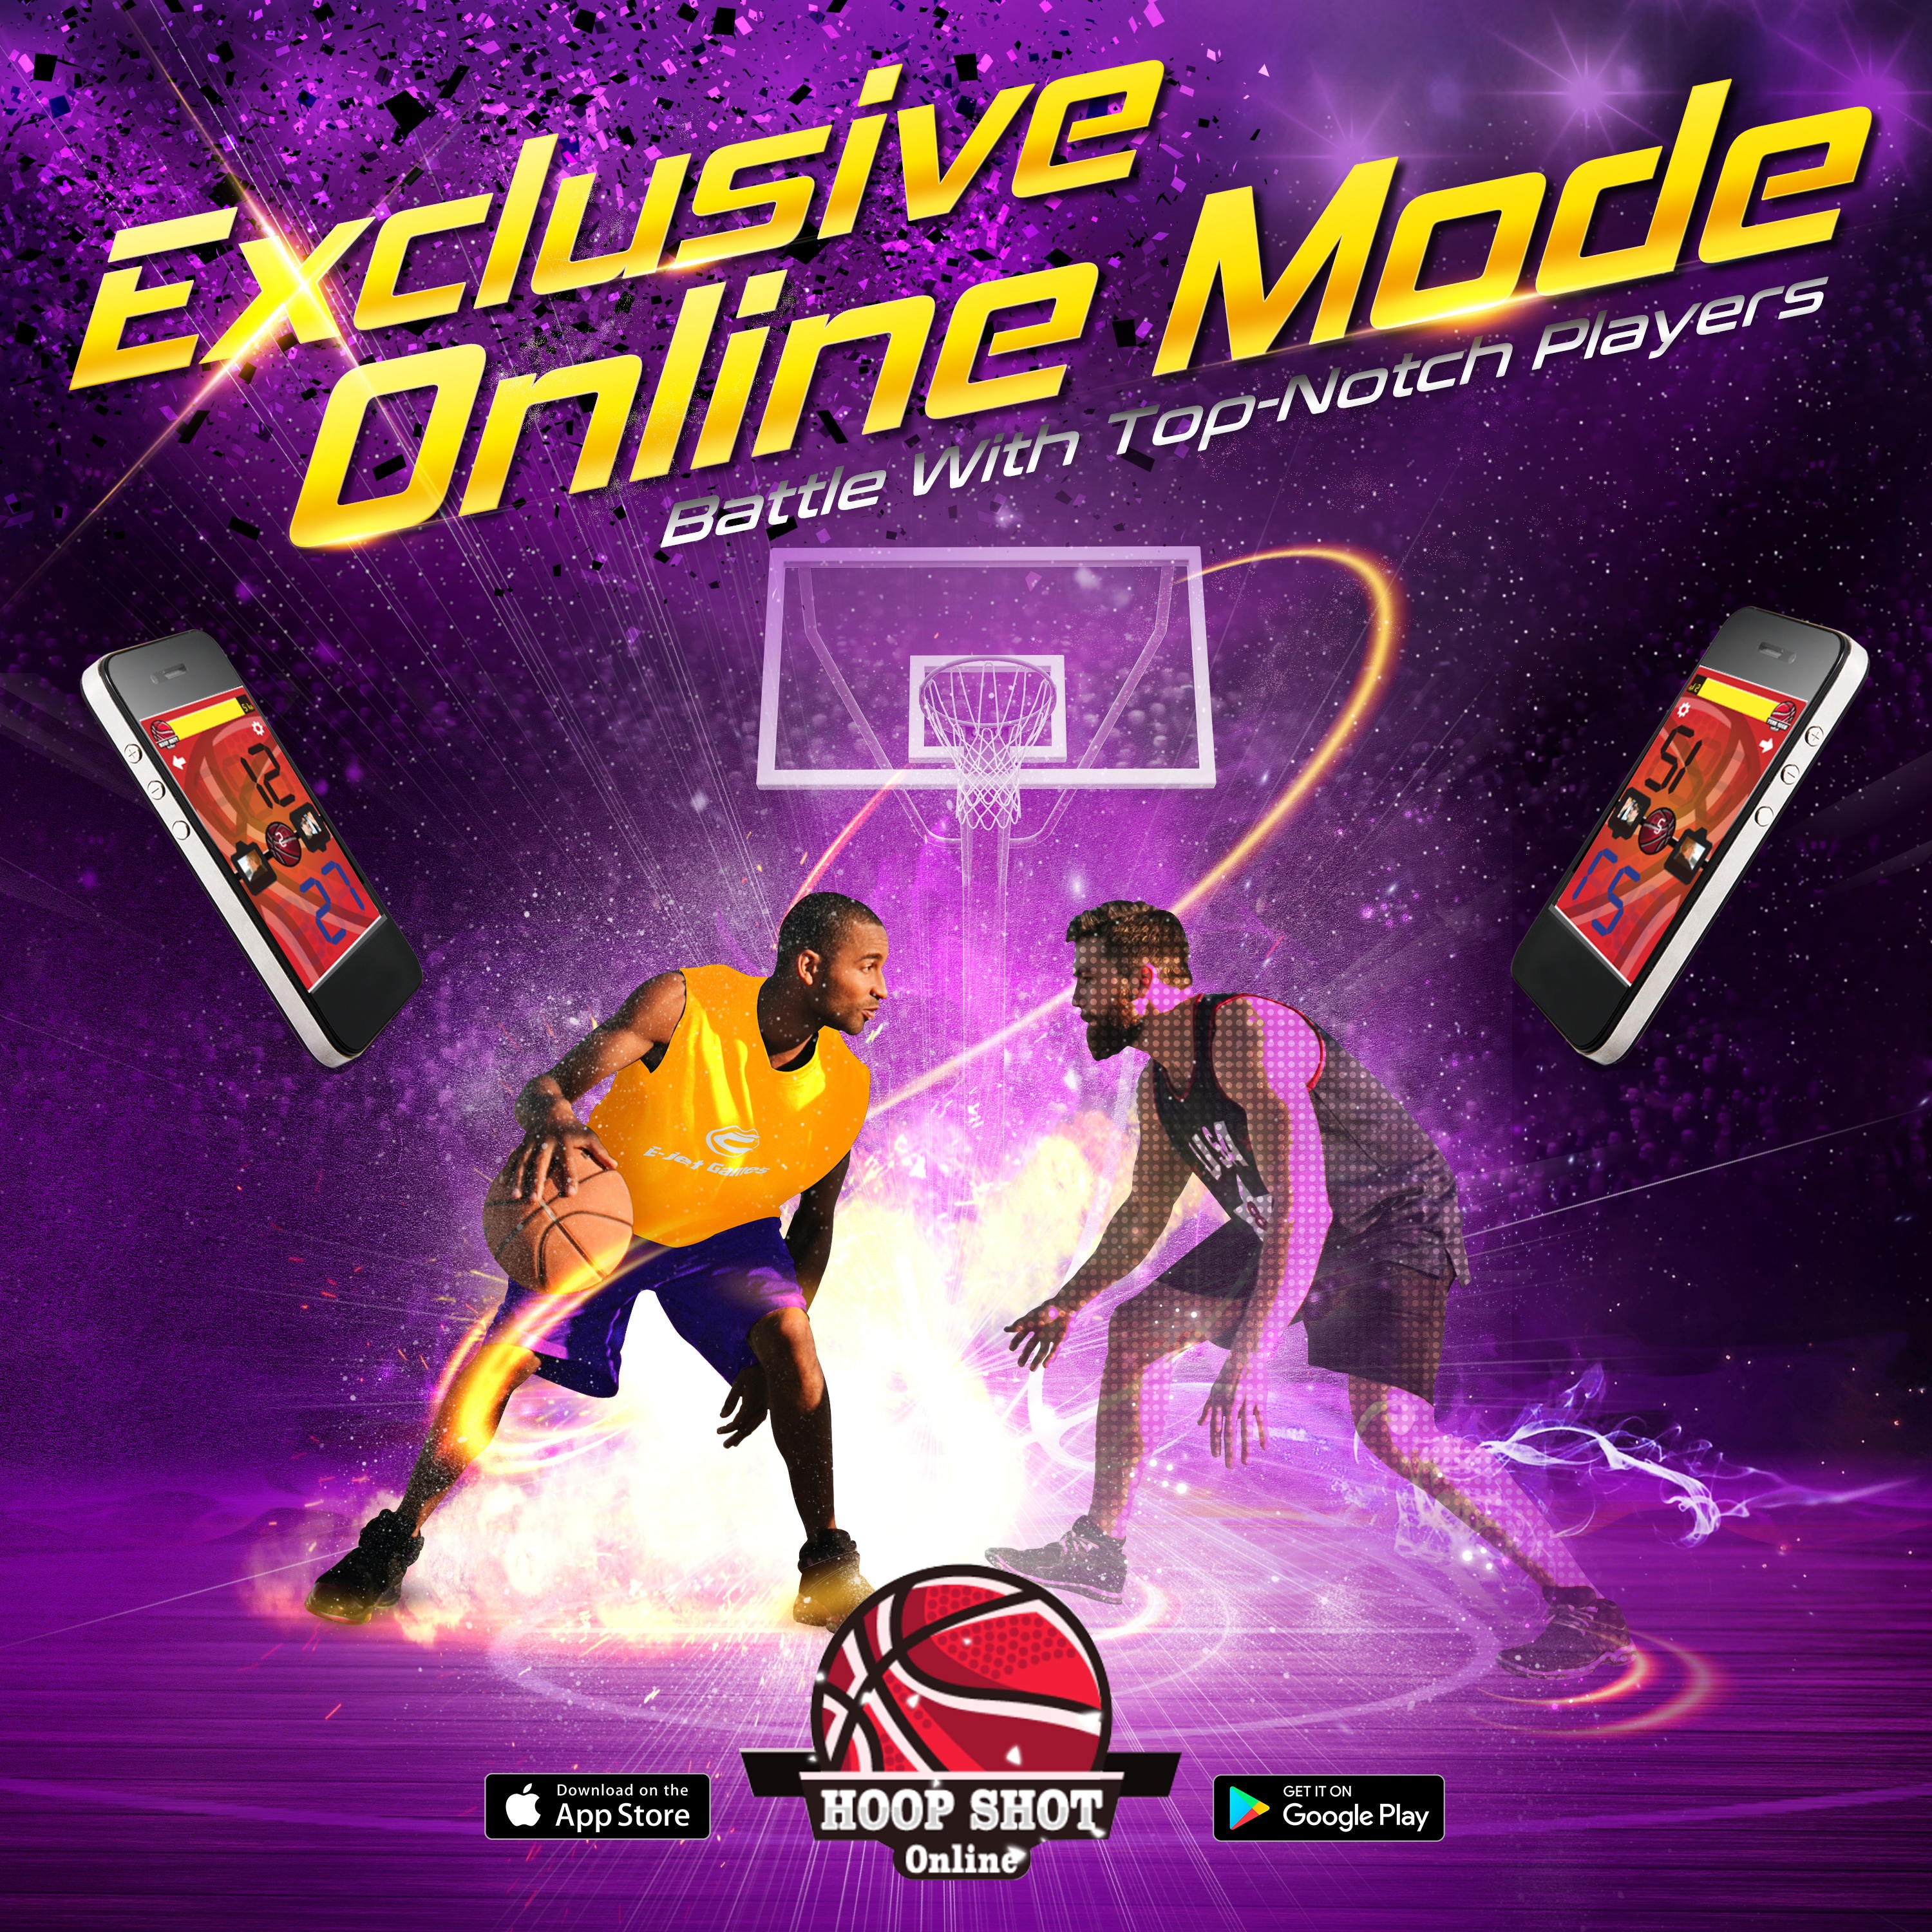 E-JET GAME Basketball Arcade Games (Online Battle and Challenge, Shoot Hoops)- Electronic Arcade Basketball Games, Dual Shot- Purple in the Electronic Basketball Games department at Lowes